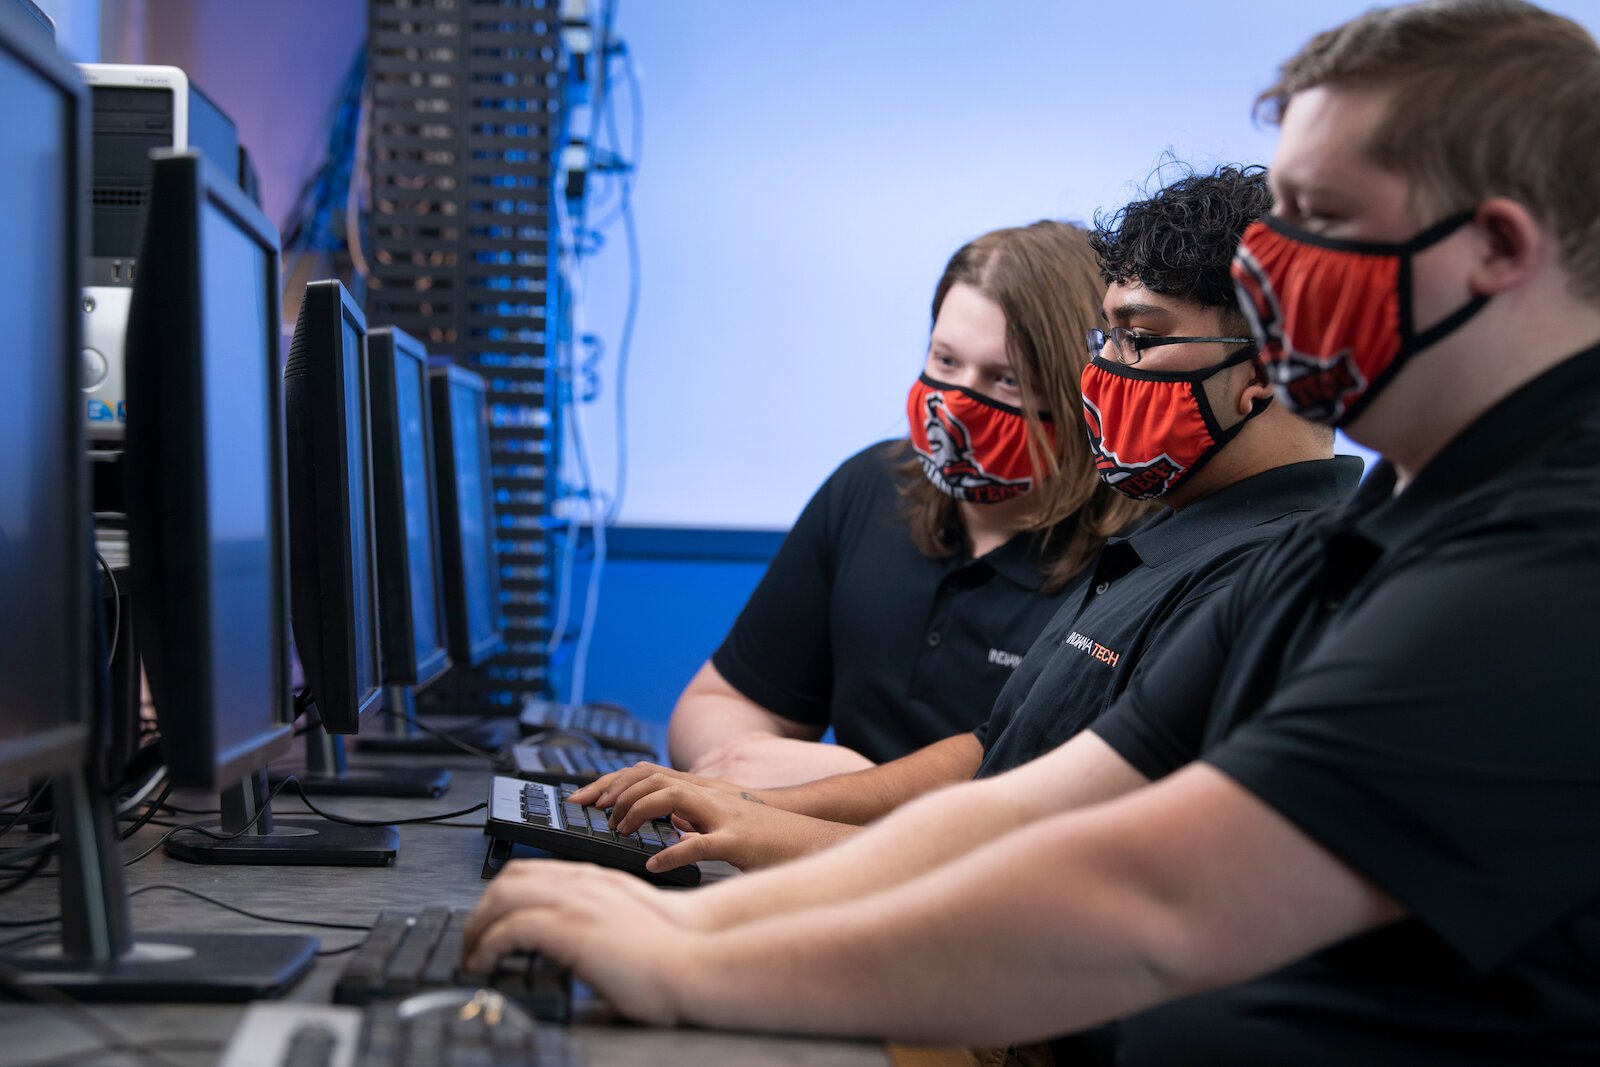 The Cyber Warriors hold tryouts and recruit from high schools.